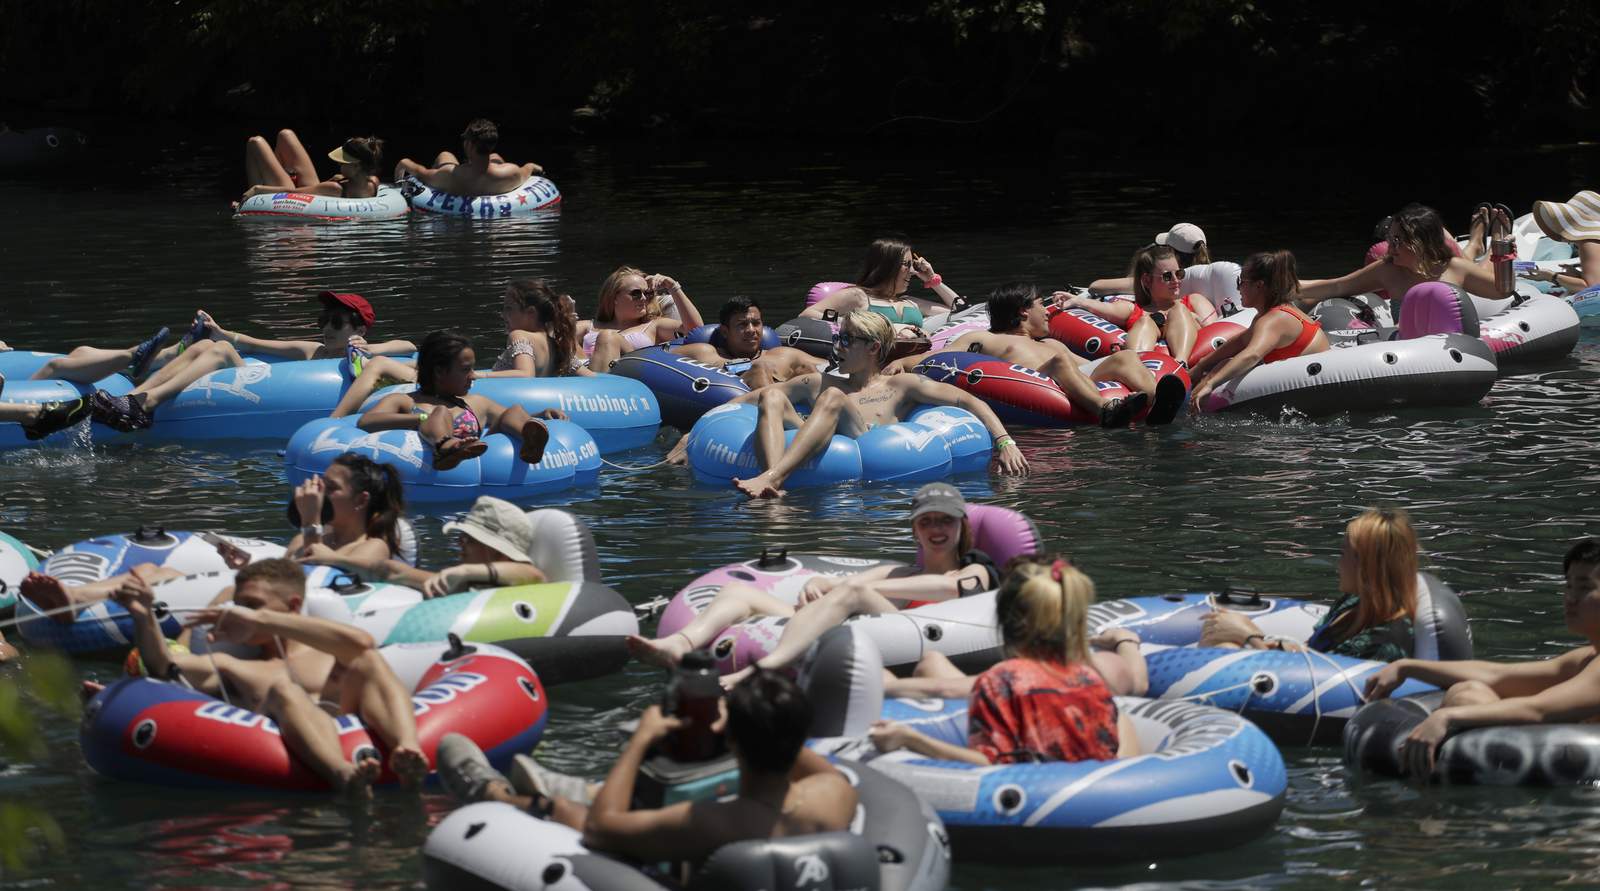 Comal River tubing company temporarily shuts down due to increased COVID-19 cases in the area